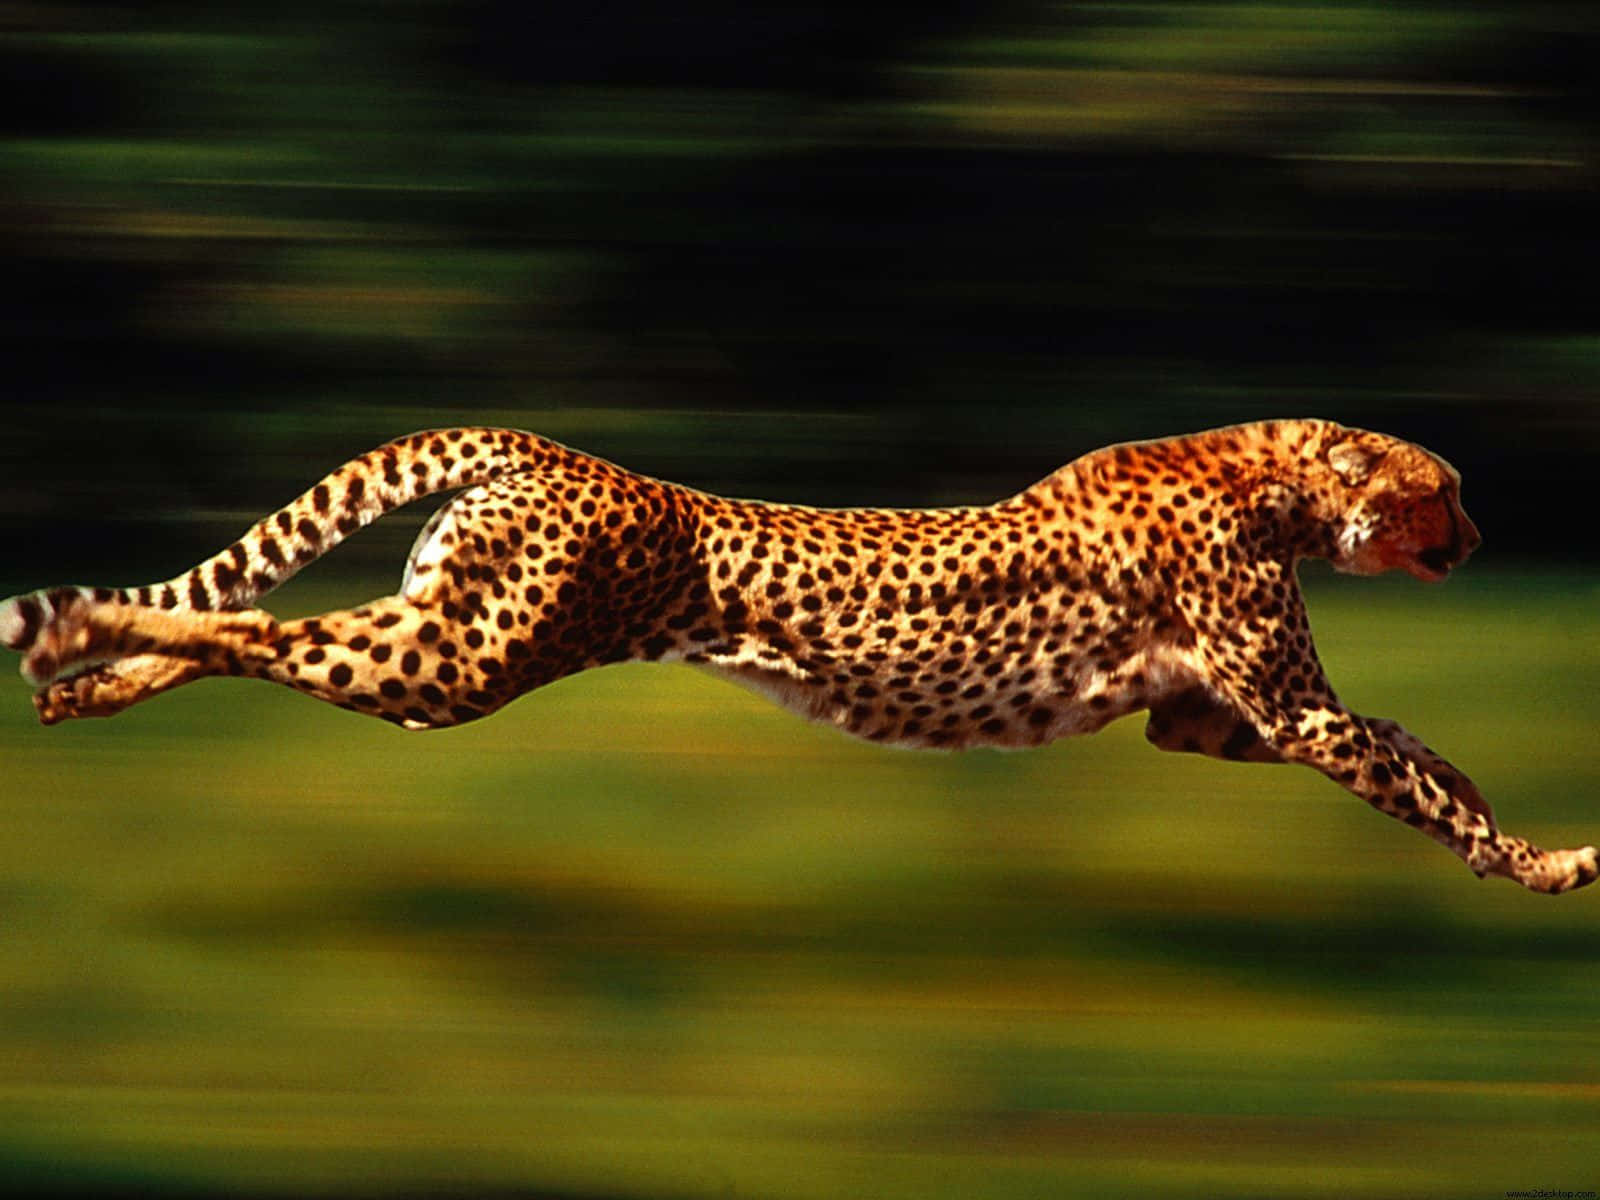 Capturing the power and grace of a beautiful cheetah